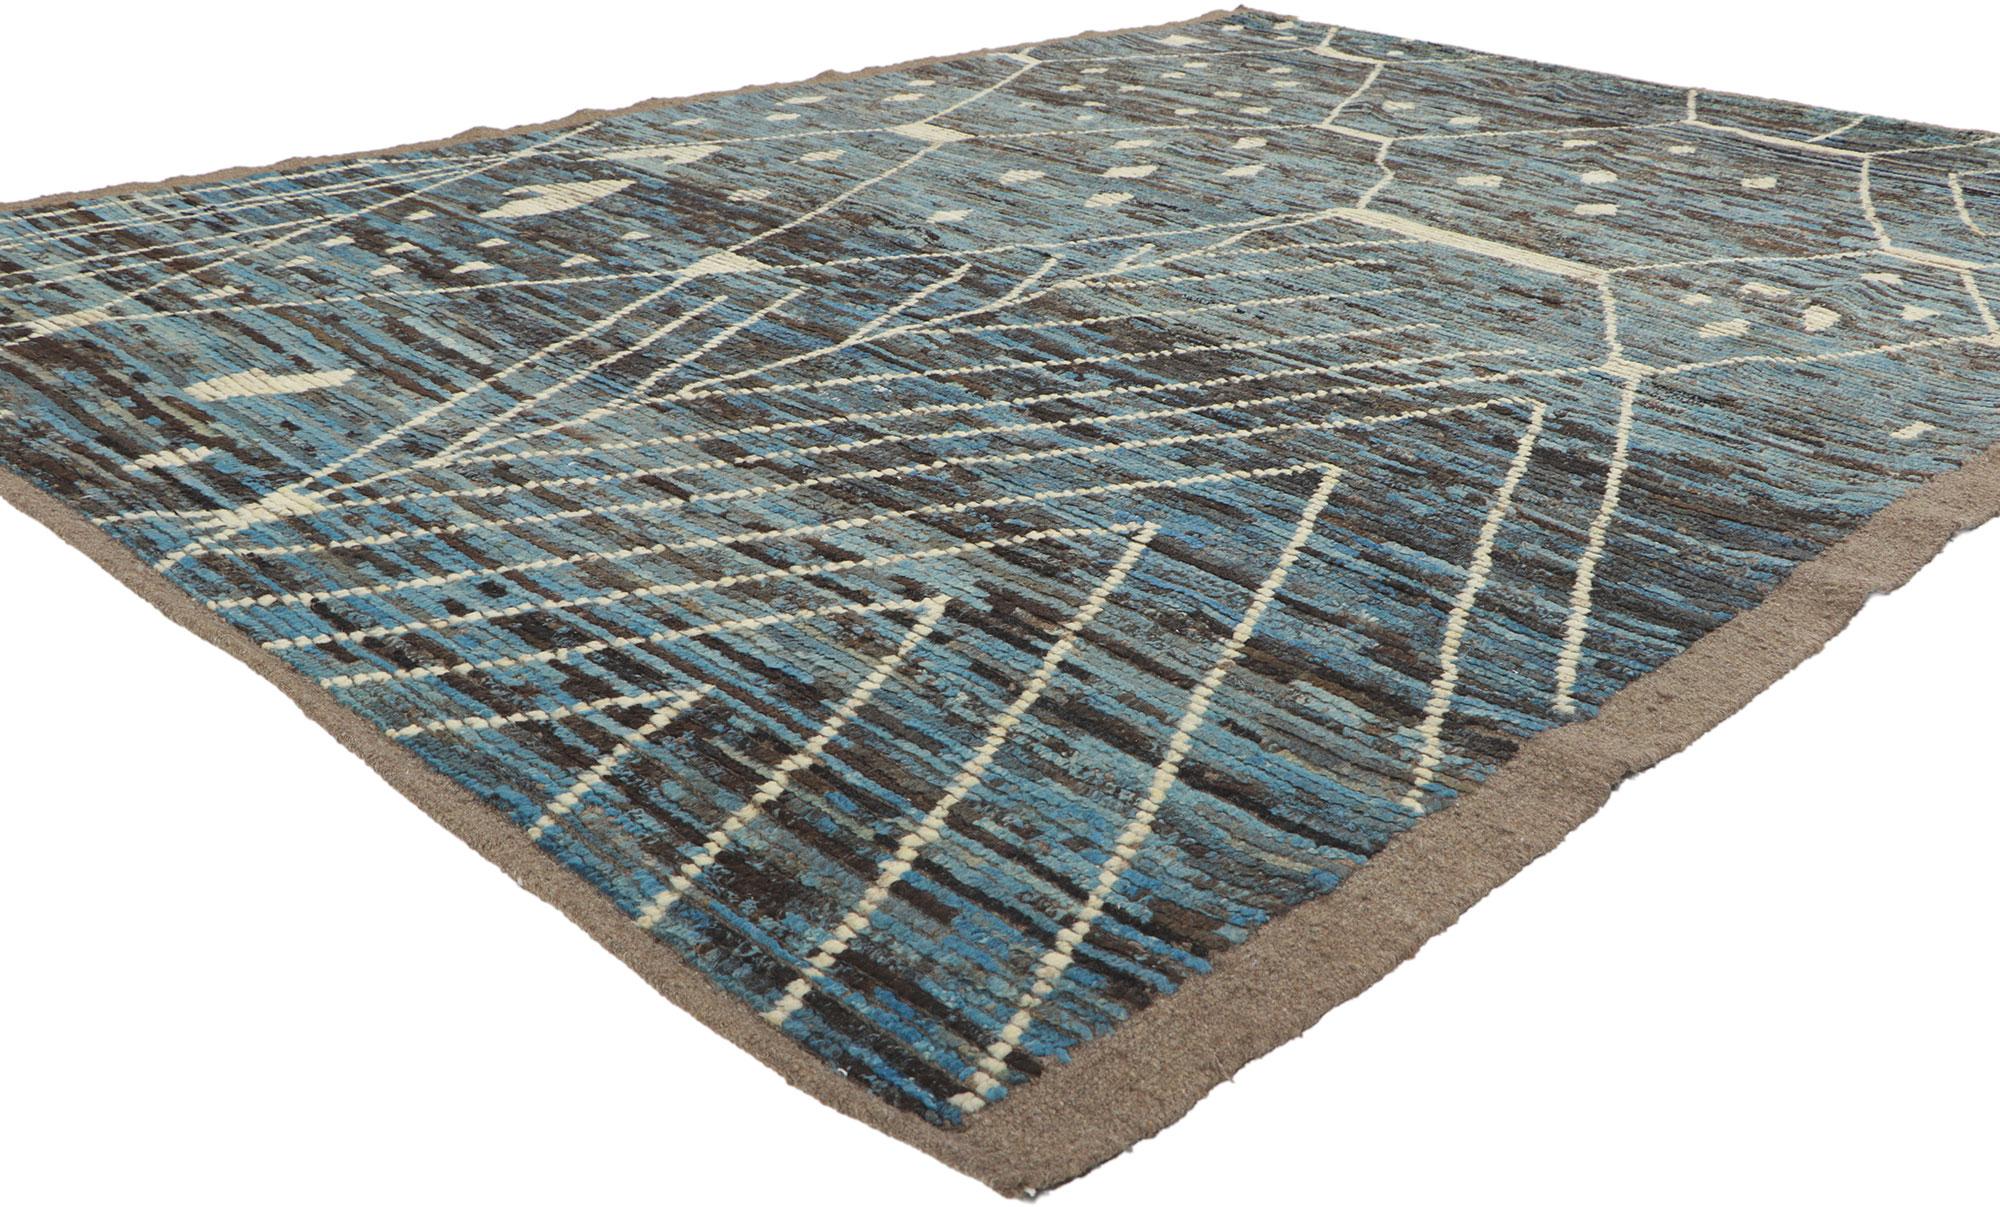 80789 New Moroccan rug with short pile, 06'06 x 09'00. With its modern style, incredible detail and texture, this hand knotted wool contemporary Moroccan rug is a captivating vision of woven beauty. The asymmetrical pattern and atmospheric colorway